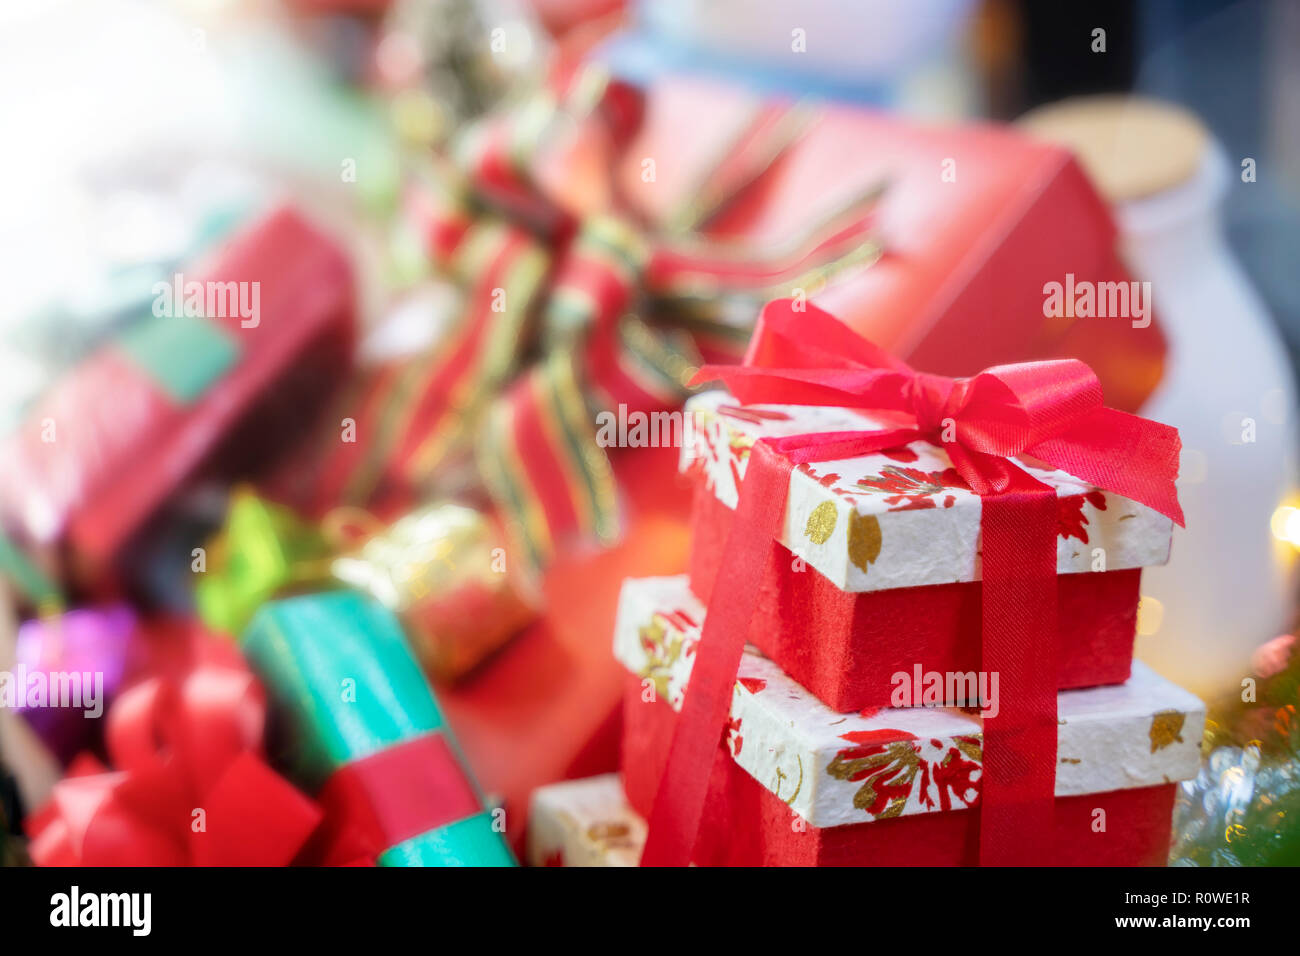 Merry Christmas background concept. Closeup of red gift box with blurred another gift boxes in background. Stock Photo